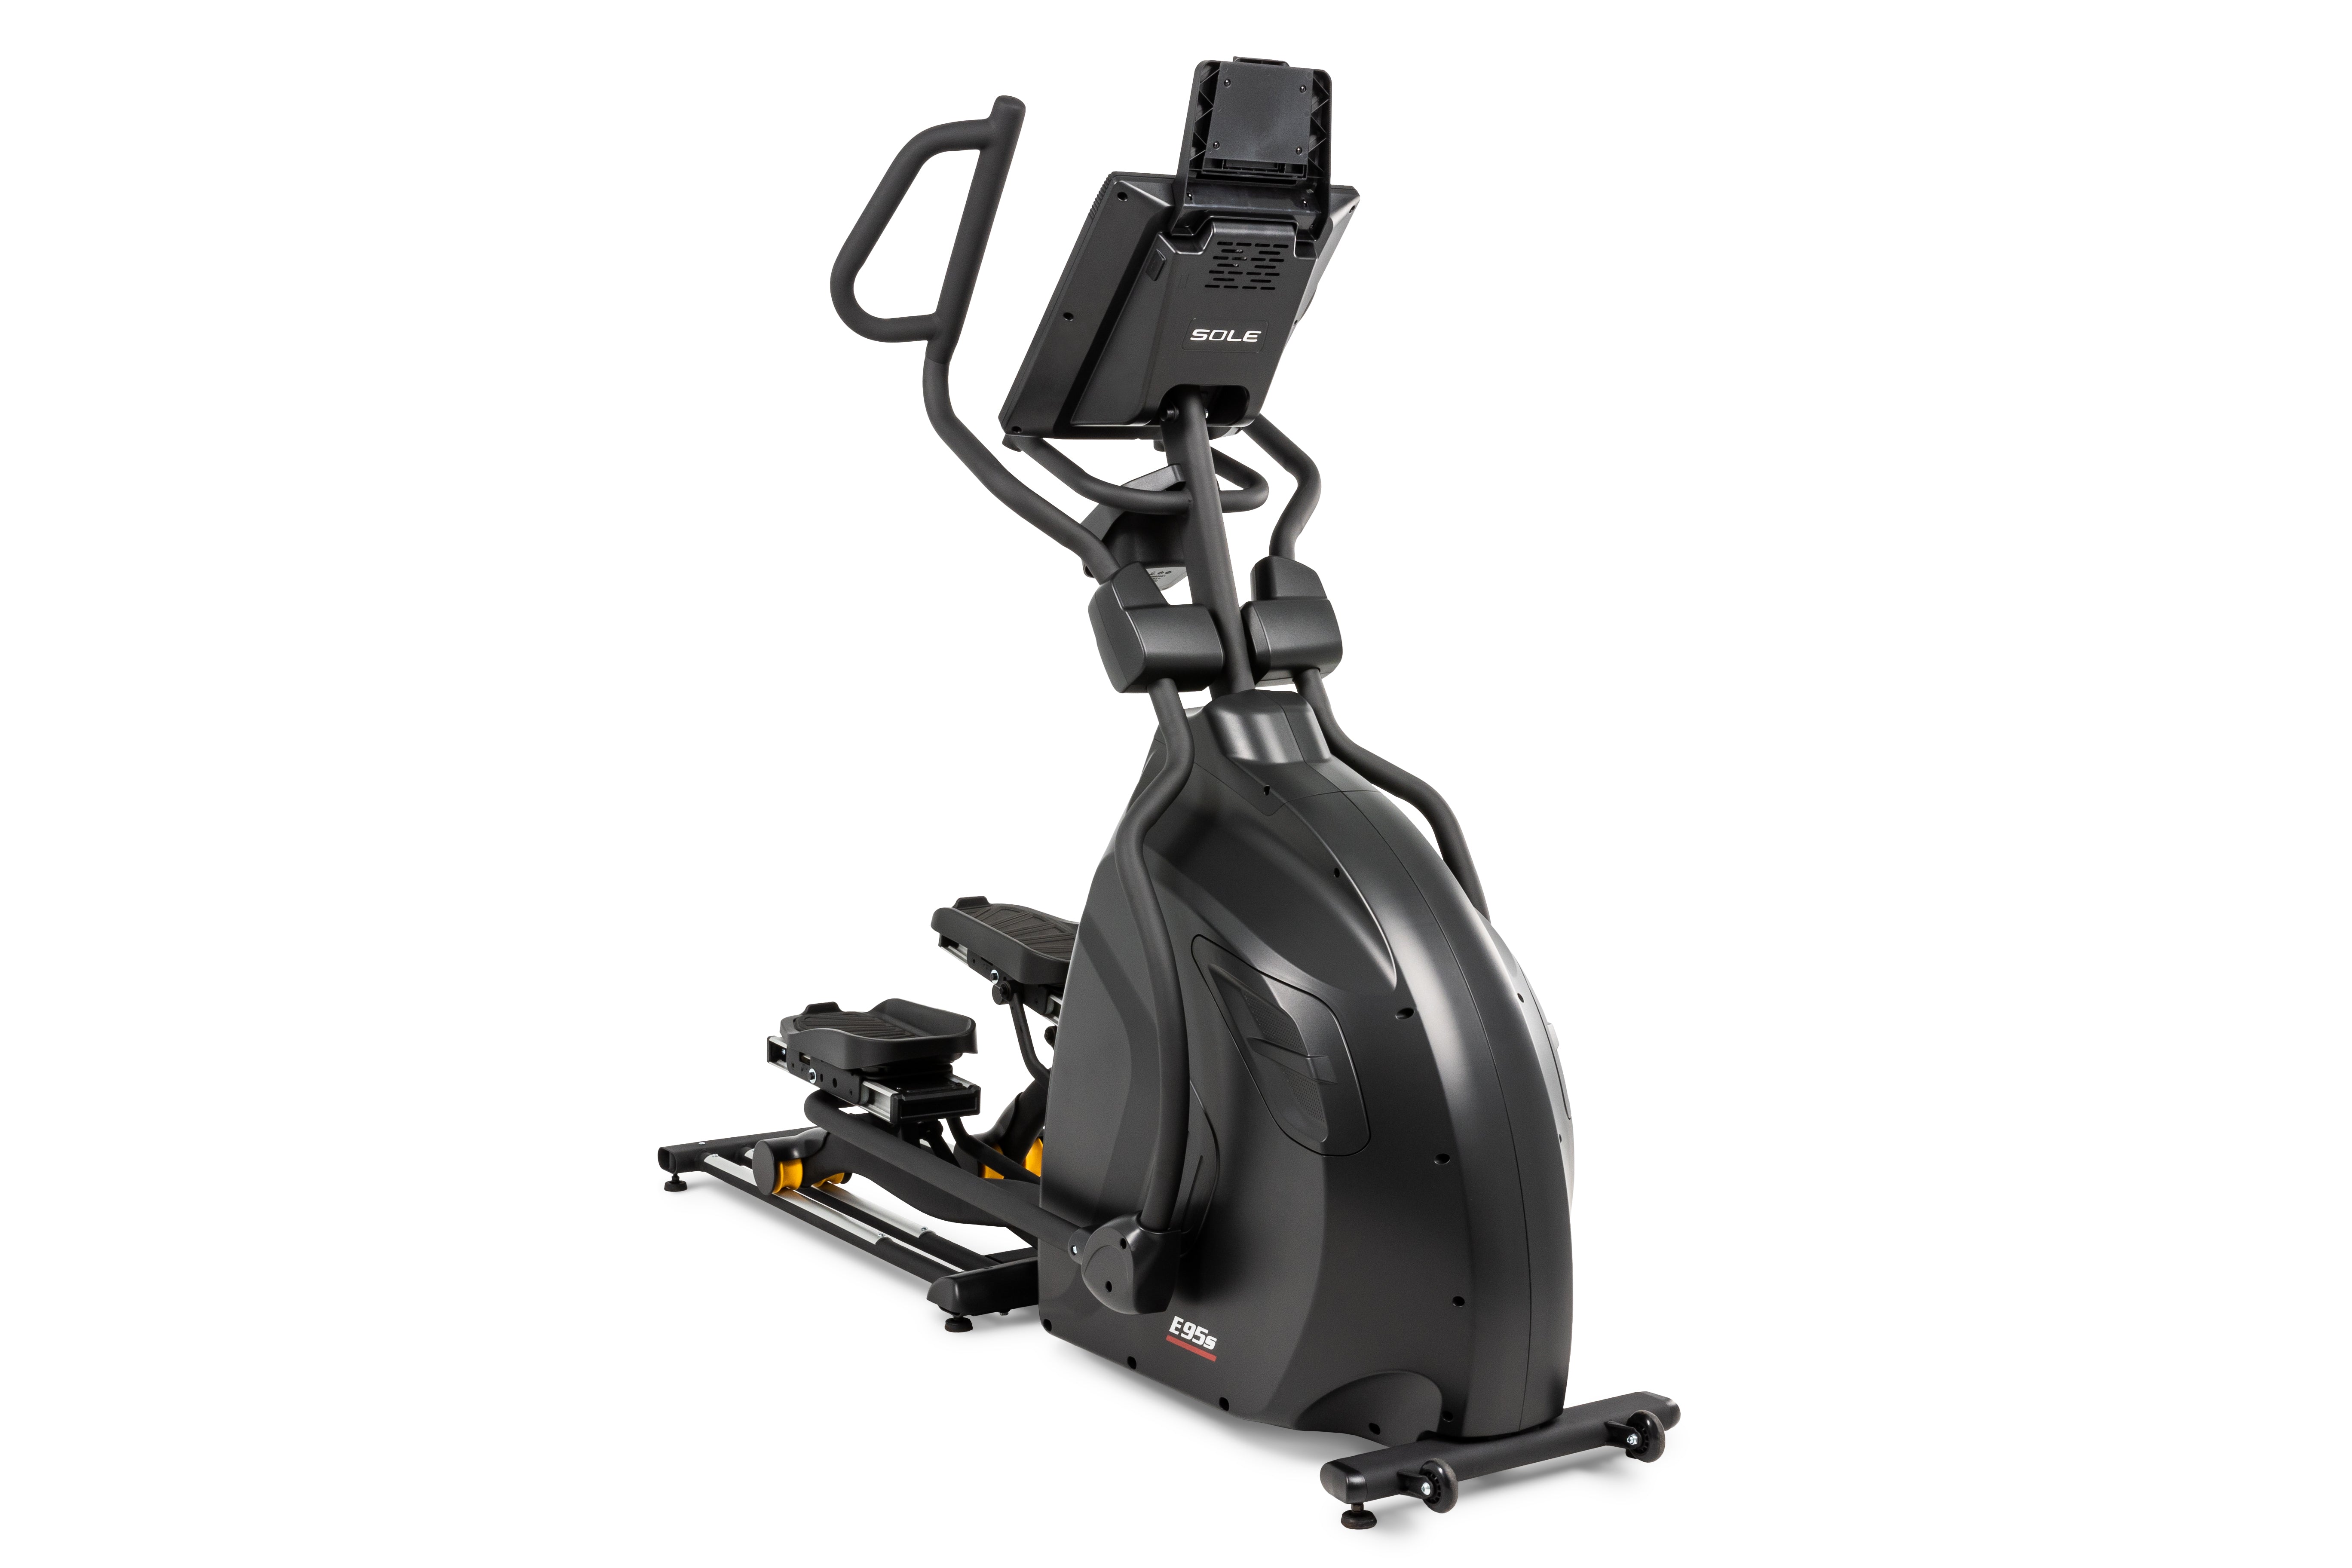 Side view of the Sole E95S elliptical machine in a matte grey finish, featuring a digital display with the SOLE logo, ergonomic handlebars, adjustable foot pedals, and a base with a yellow folding release lever and smooth-rolling wheels for easy movement.